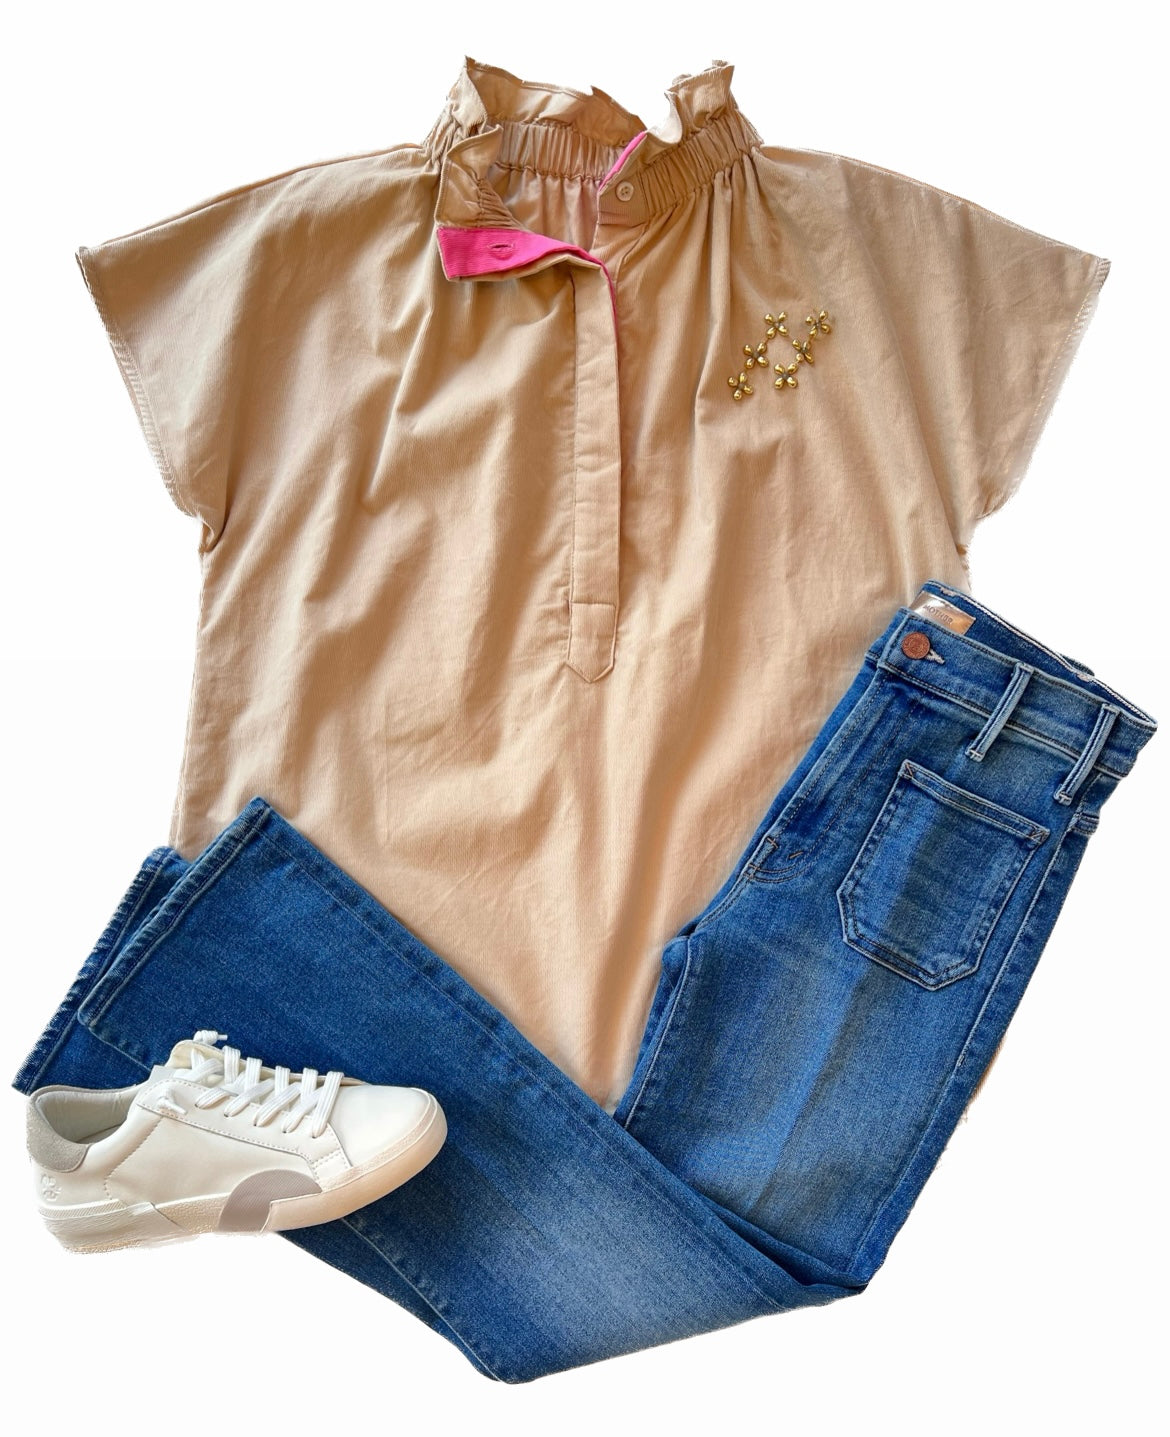 Emily Corduroy Top in Camel/Pink